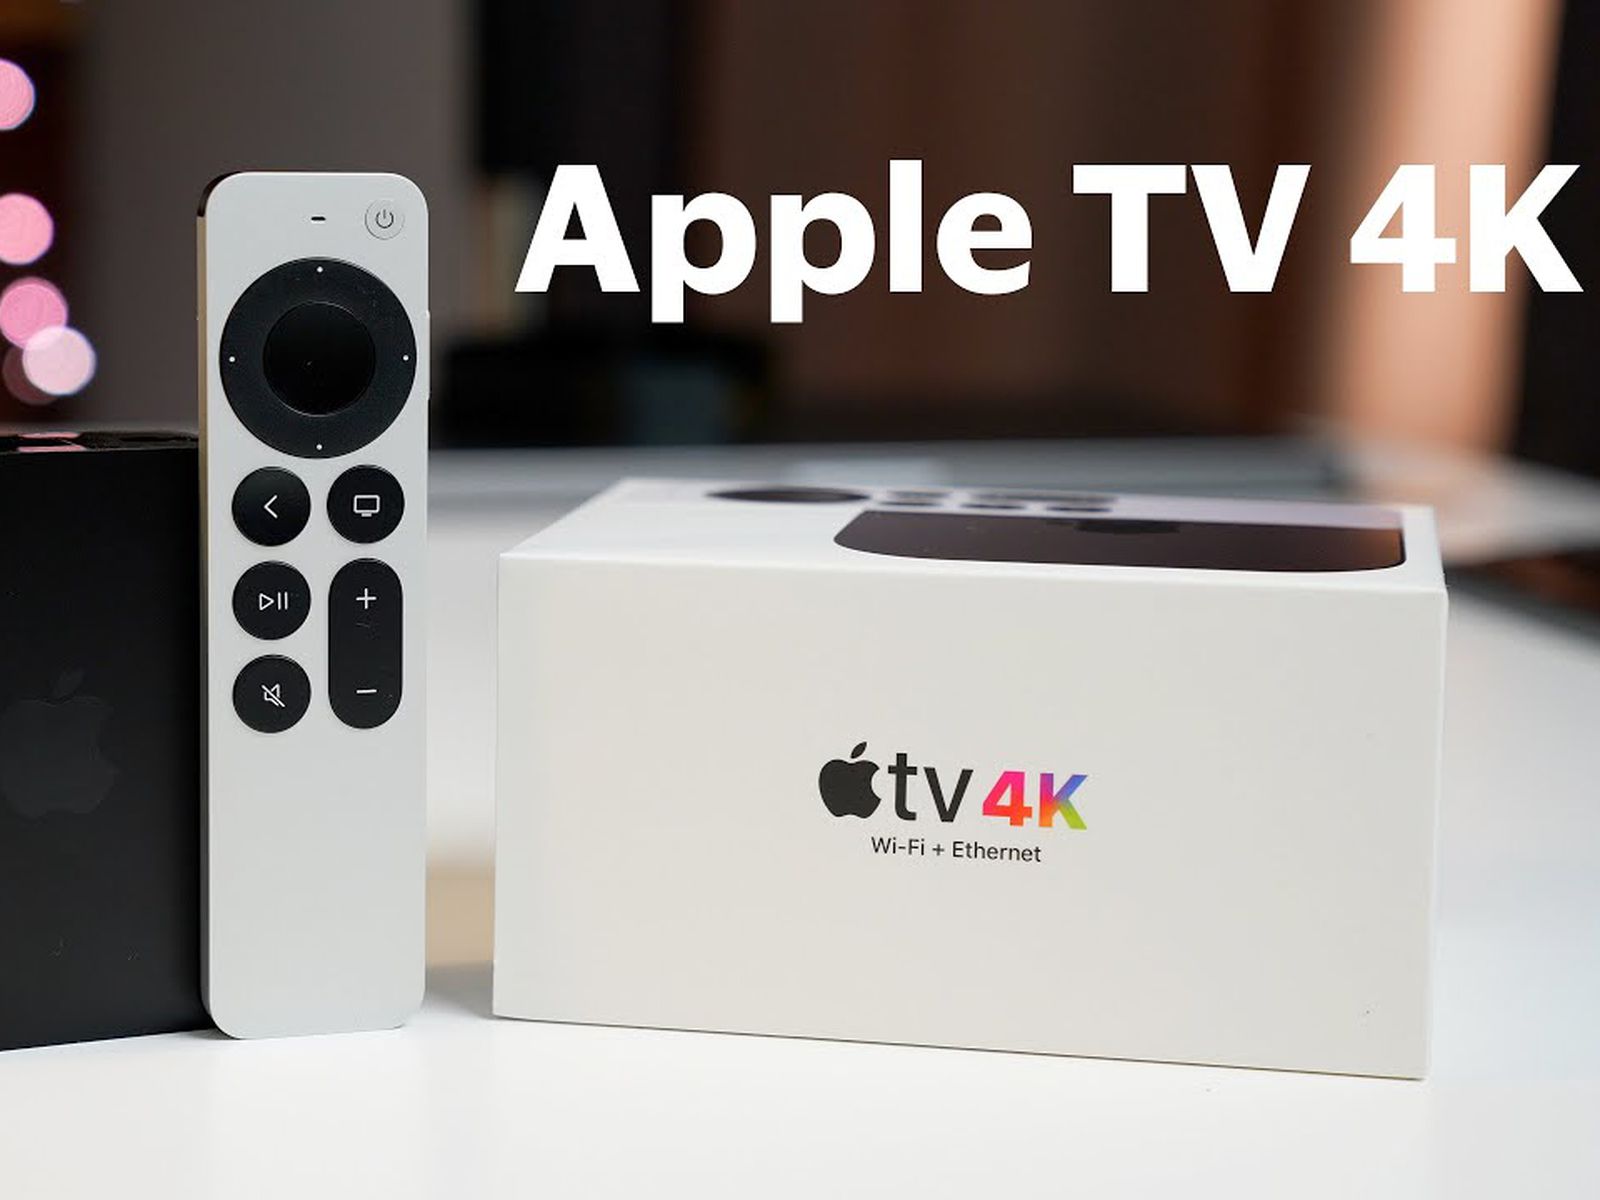 New 2022 Apple TV 4K - Unboxing, Comparison and Overview 